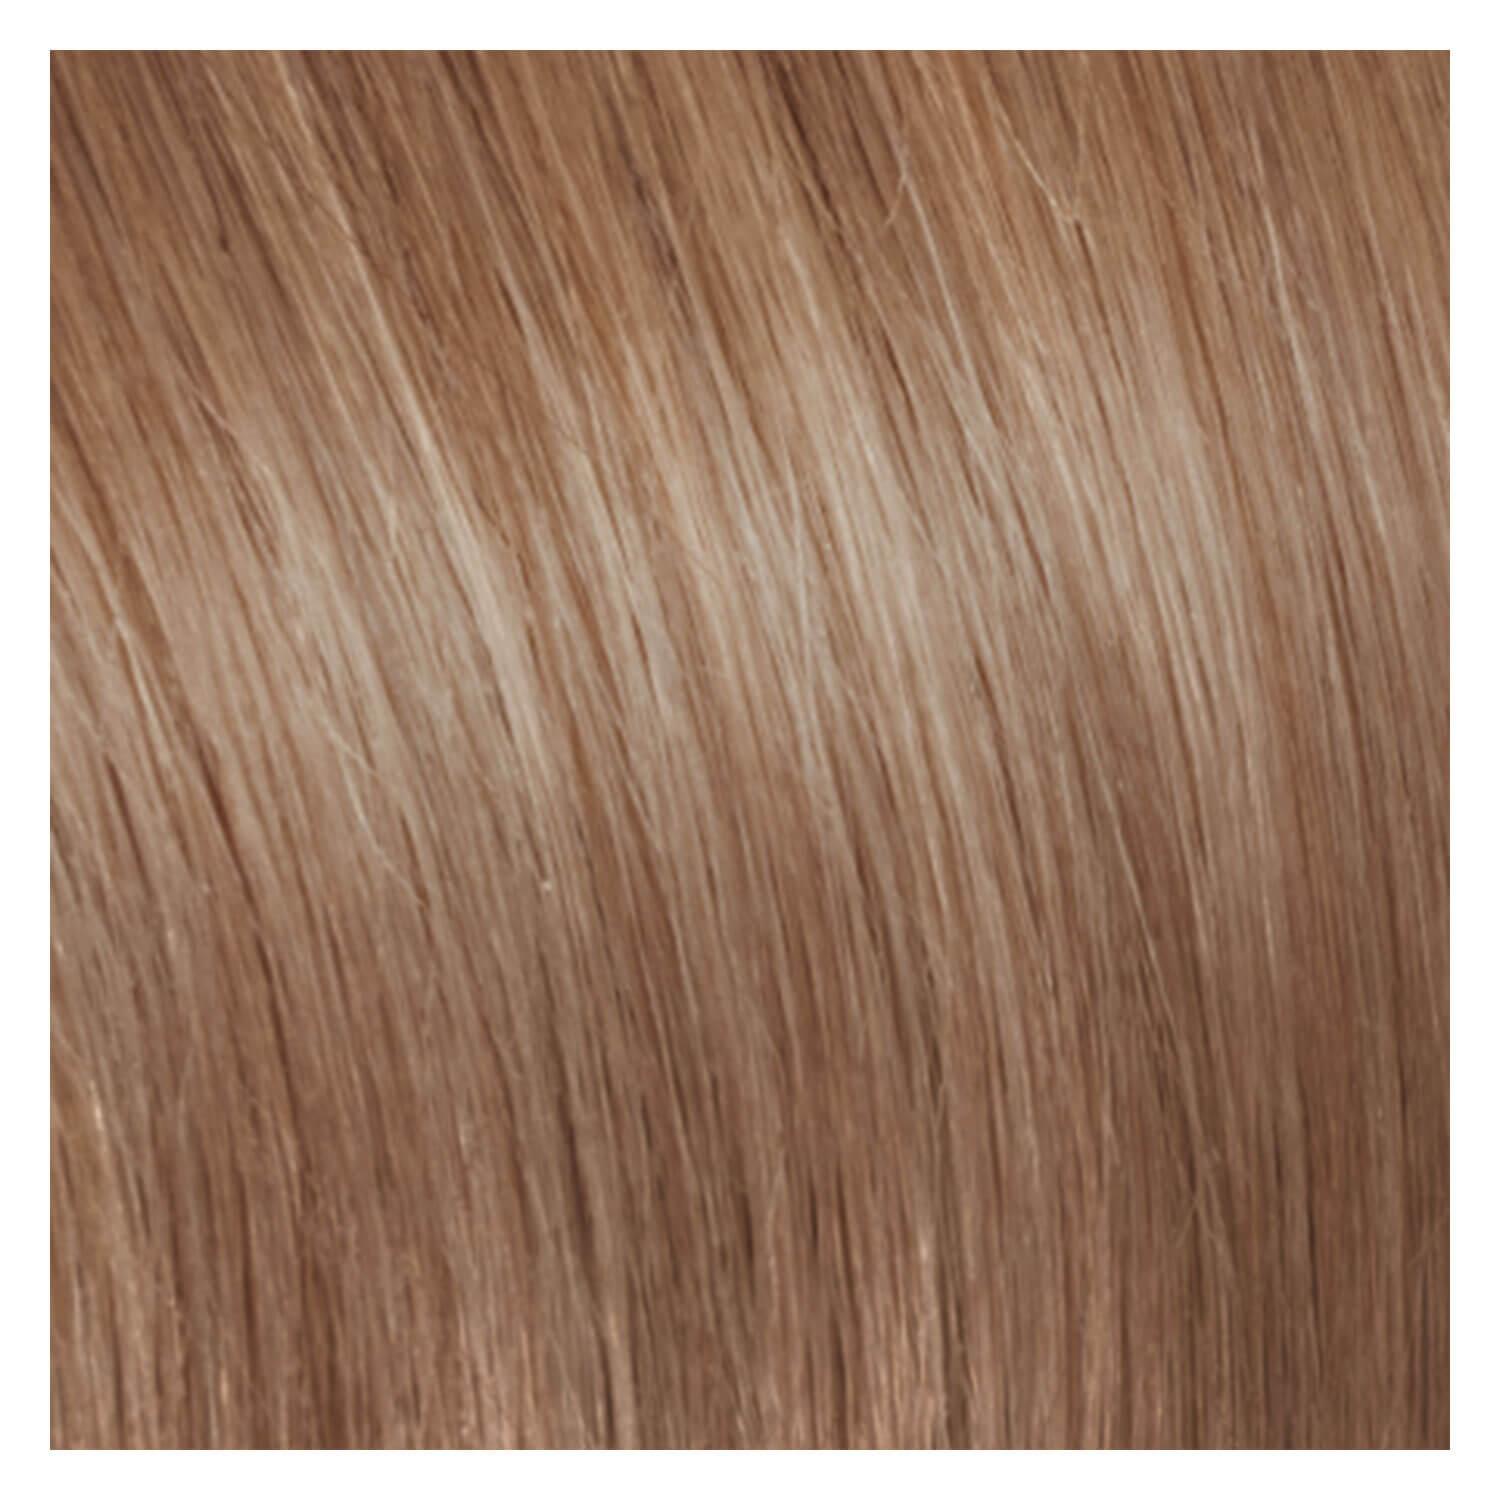 SHE Weft In-System Hair Extensions - 27 Medium Gold Blond 50/60cm